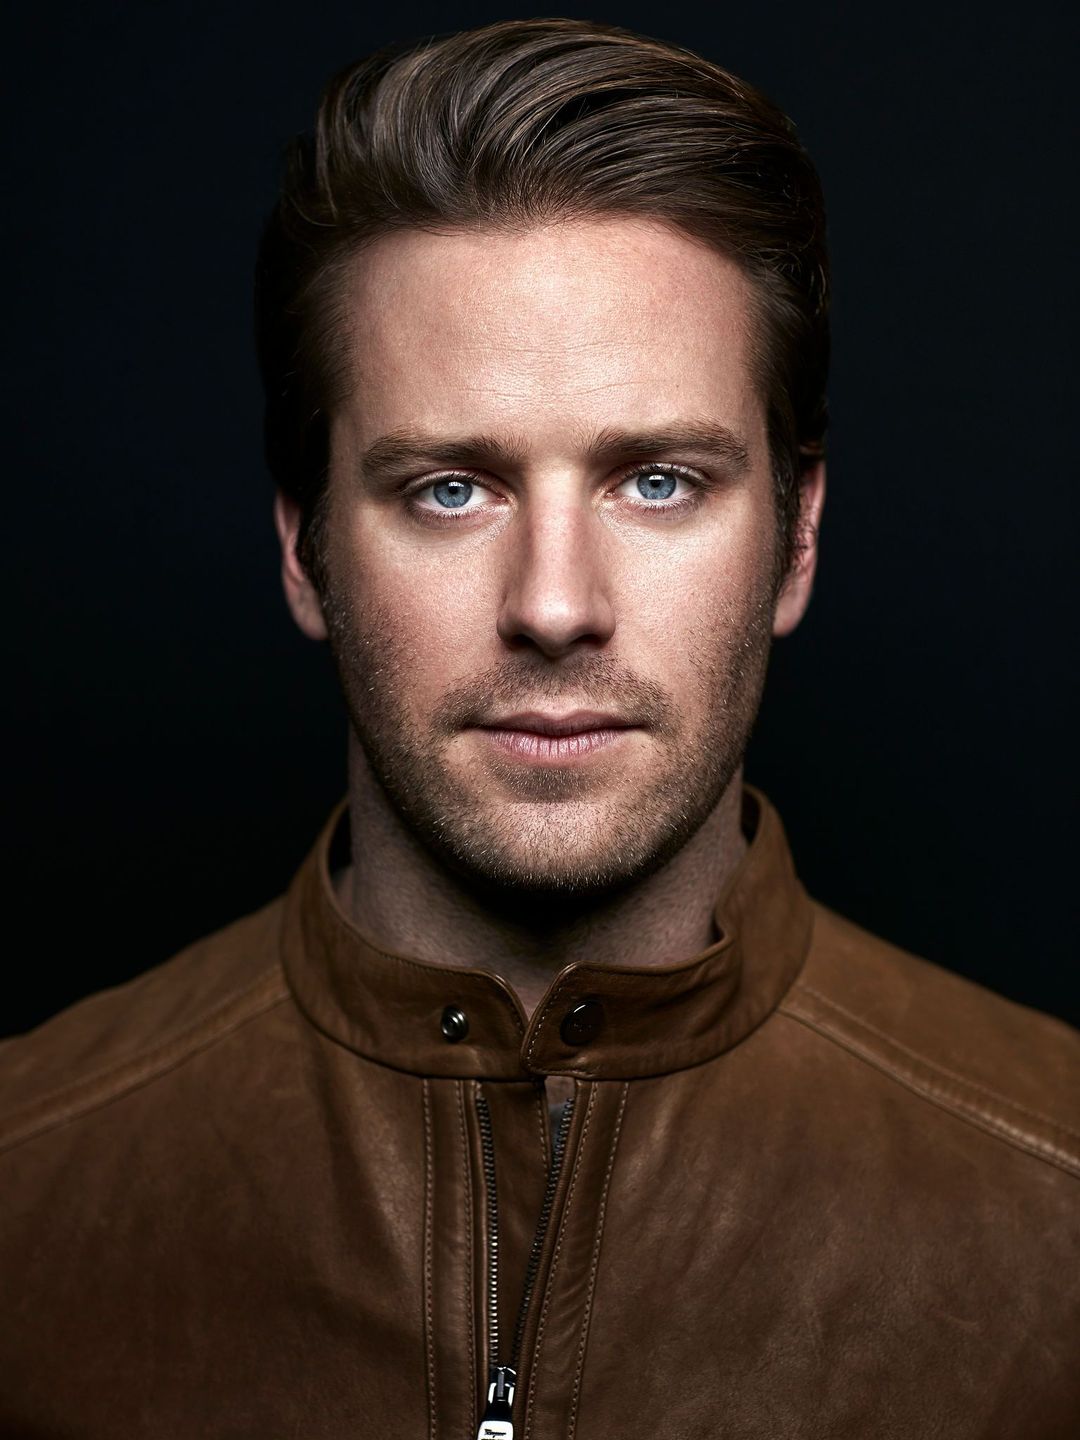 Armie Hammer young age